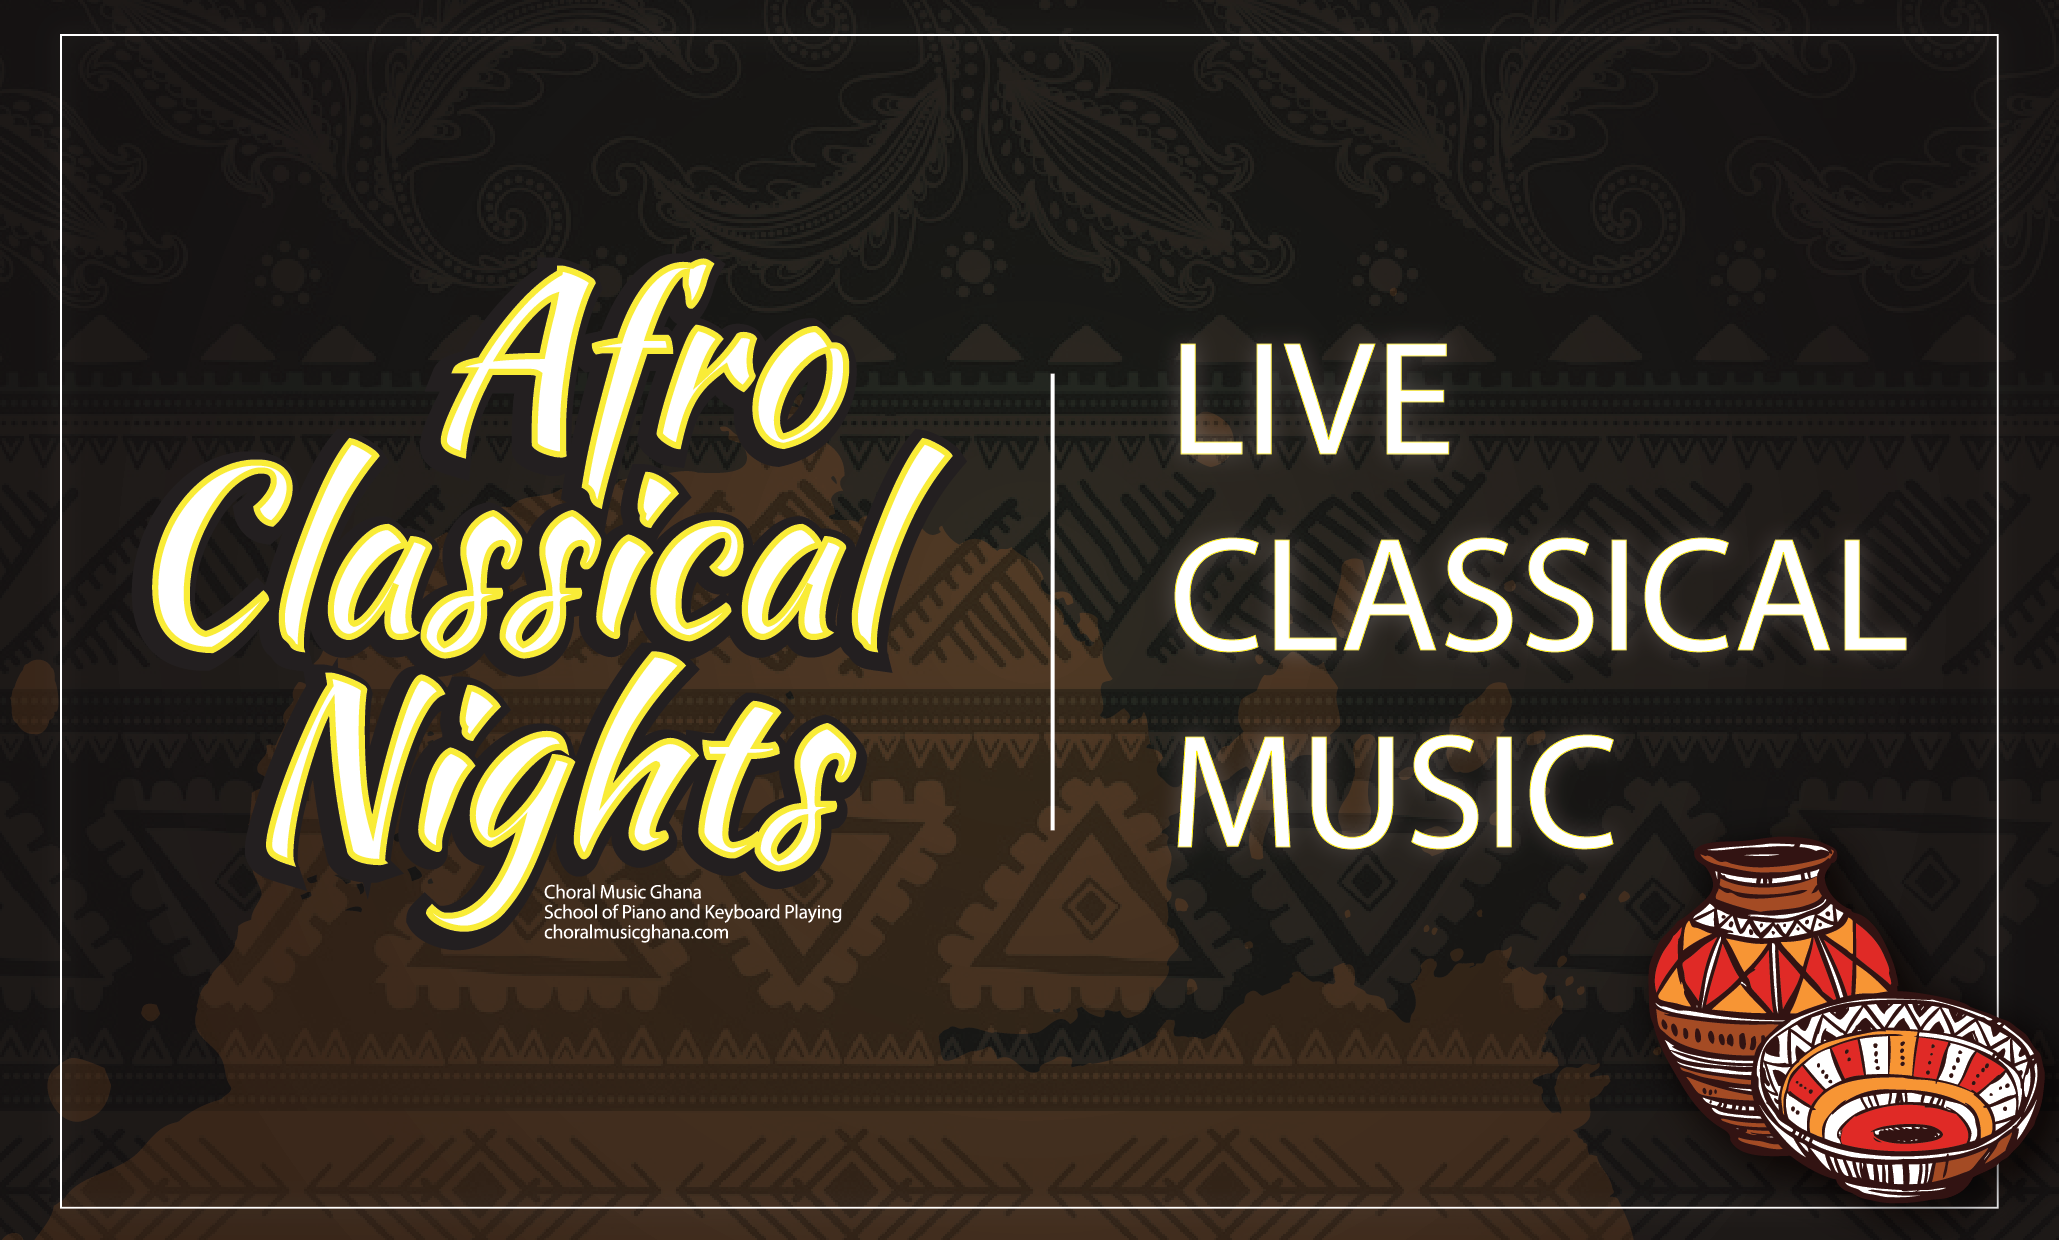 Afro Classical Nights | Live Classical Music The flagship event of Choral Music Ghana provides a platform for Ghanaian classical musicians to interact with audiences and perform their best pieces in a relaxed, fun, afropolitan lounge.